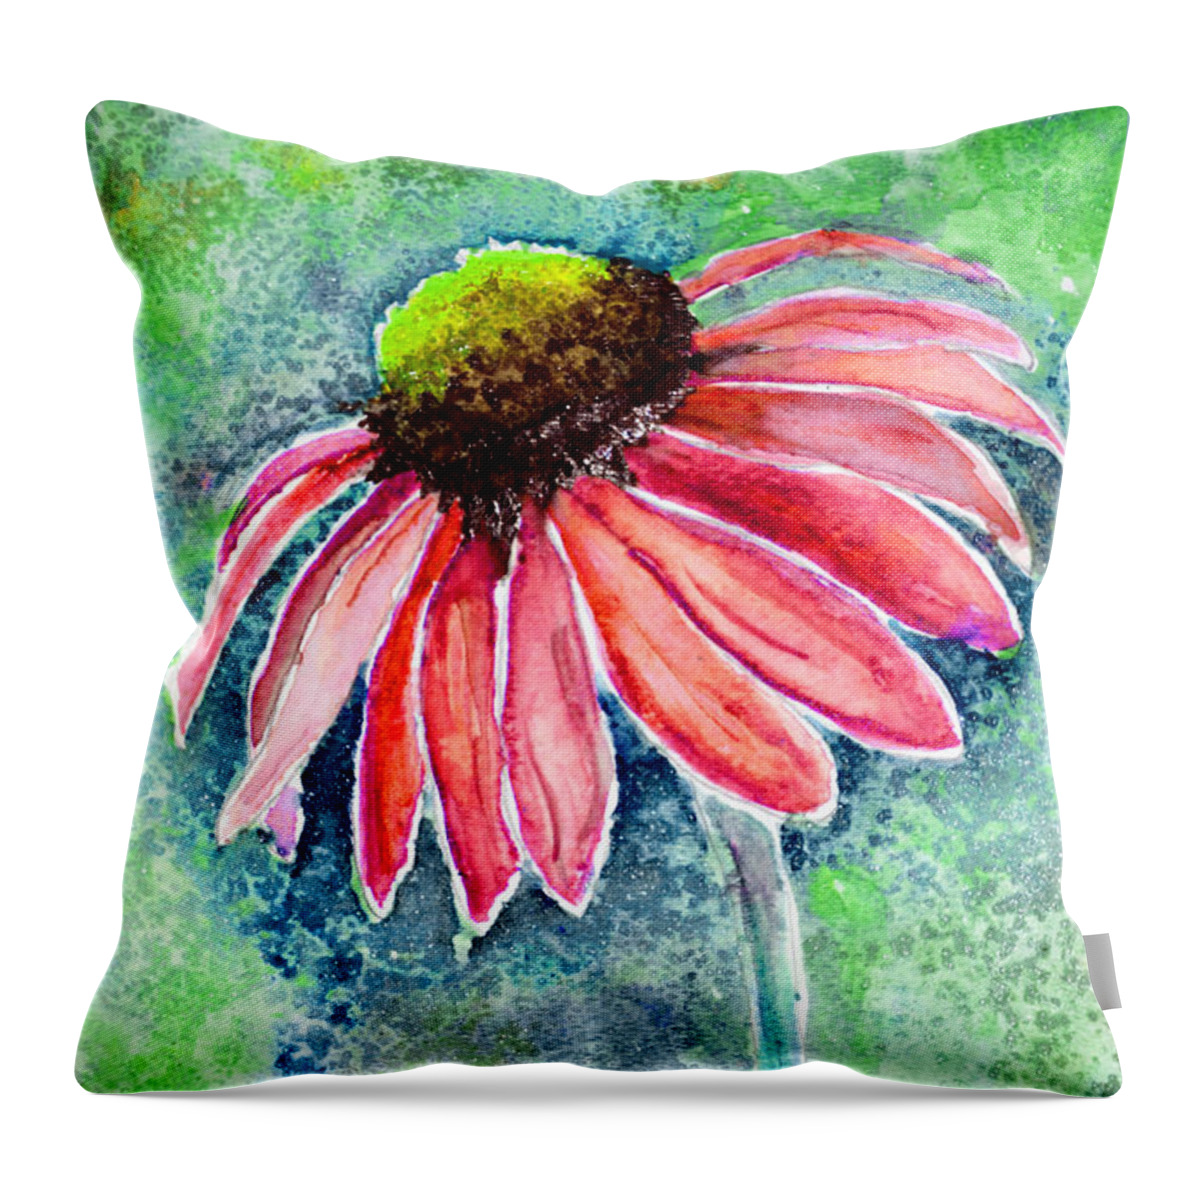 Abstract Throw Pillow featuring the painting Red Cone Flower 9-1-15 by Mas Art Studio